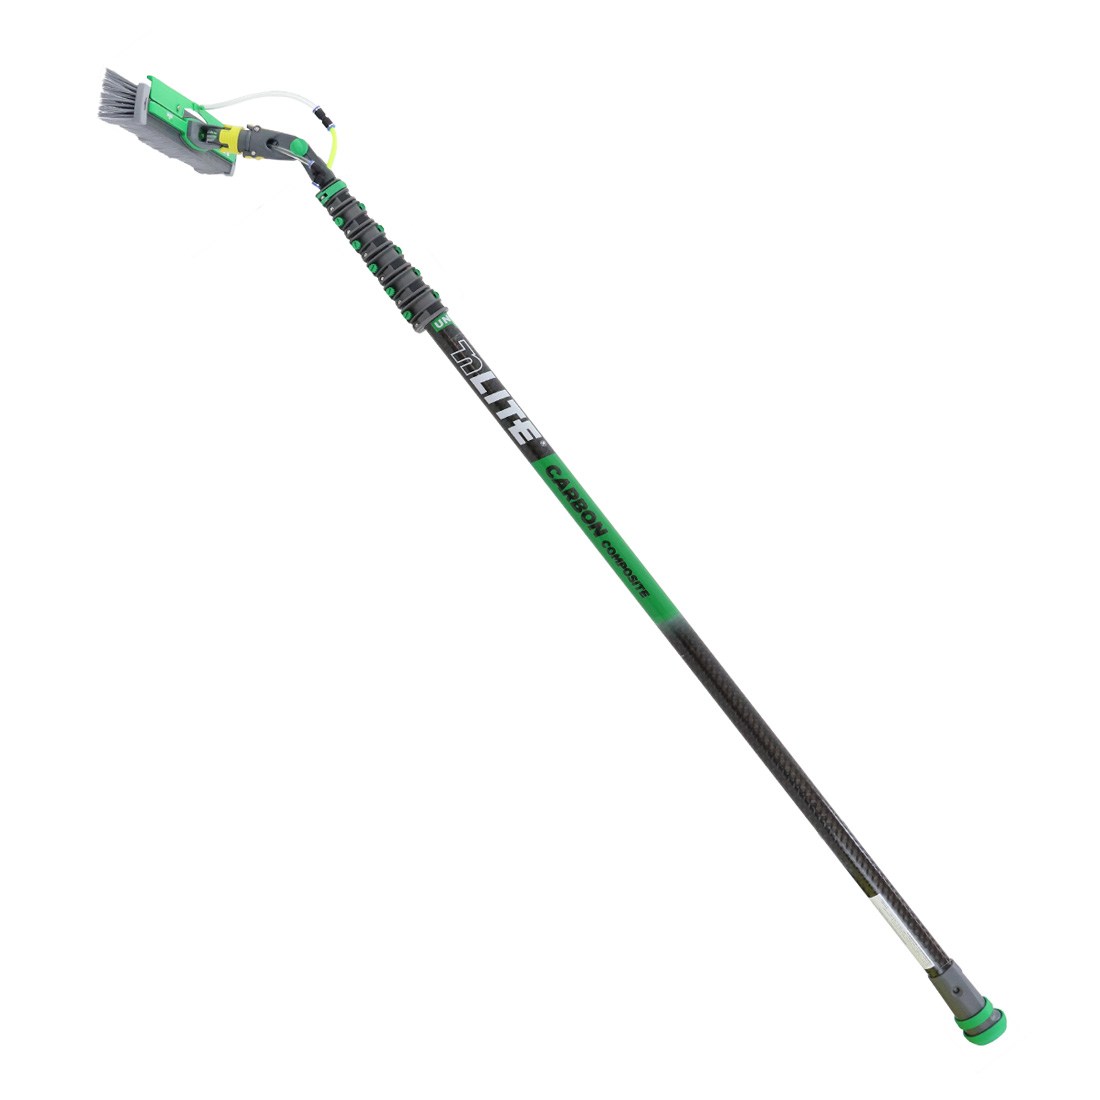 Unger nLITE Carbon Composite Water Fed Pole Kit 28 Foot - 16 Inch Powerbrush Full View